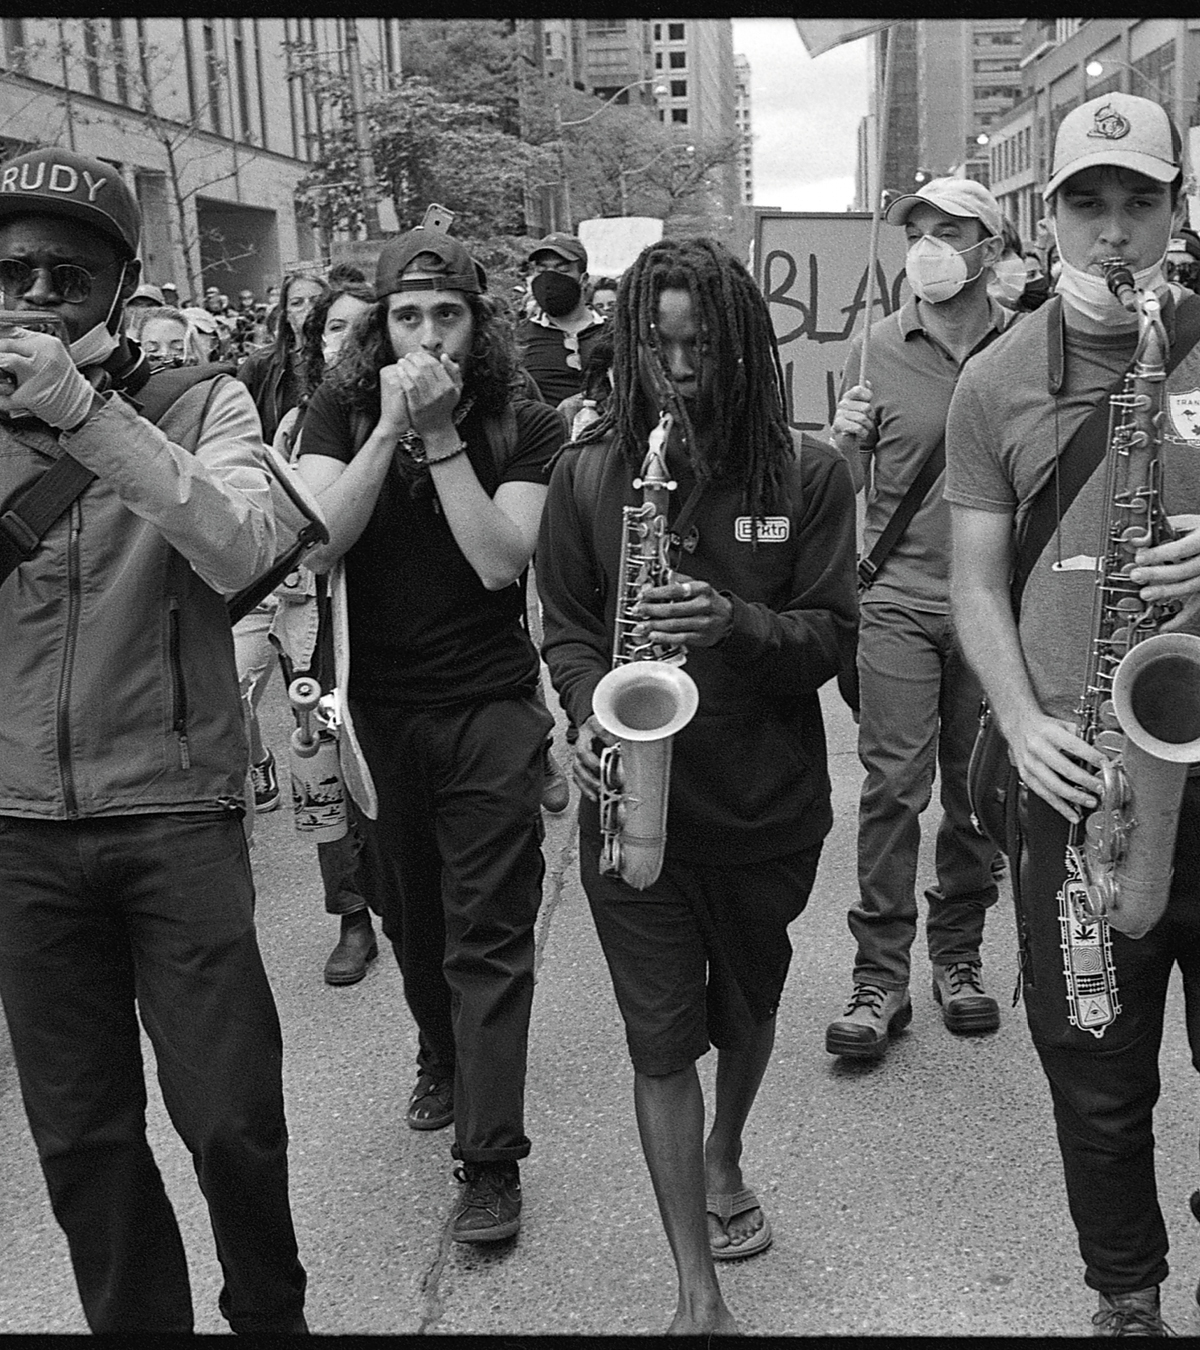 Black and white photograph of a crowd marching down a street playing instruments